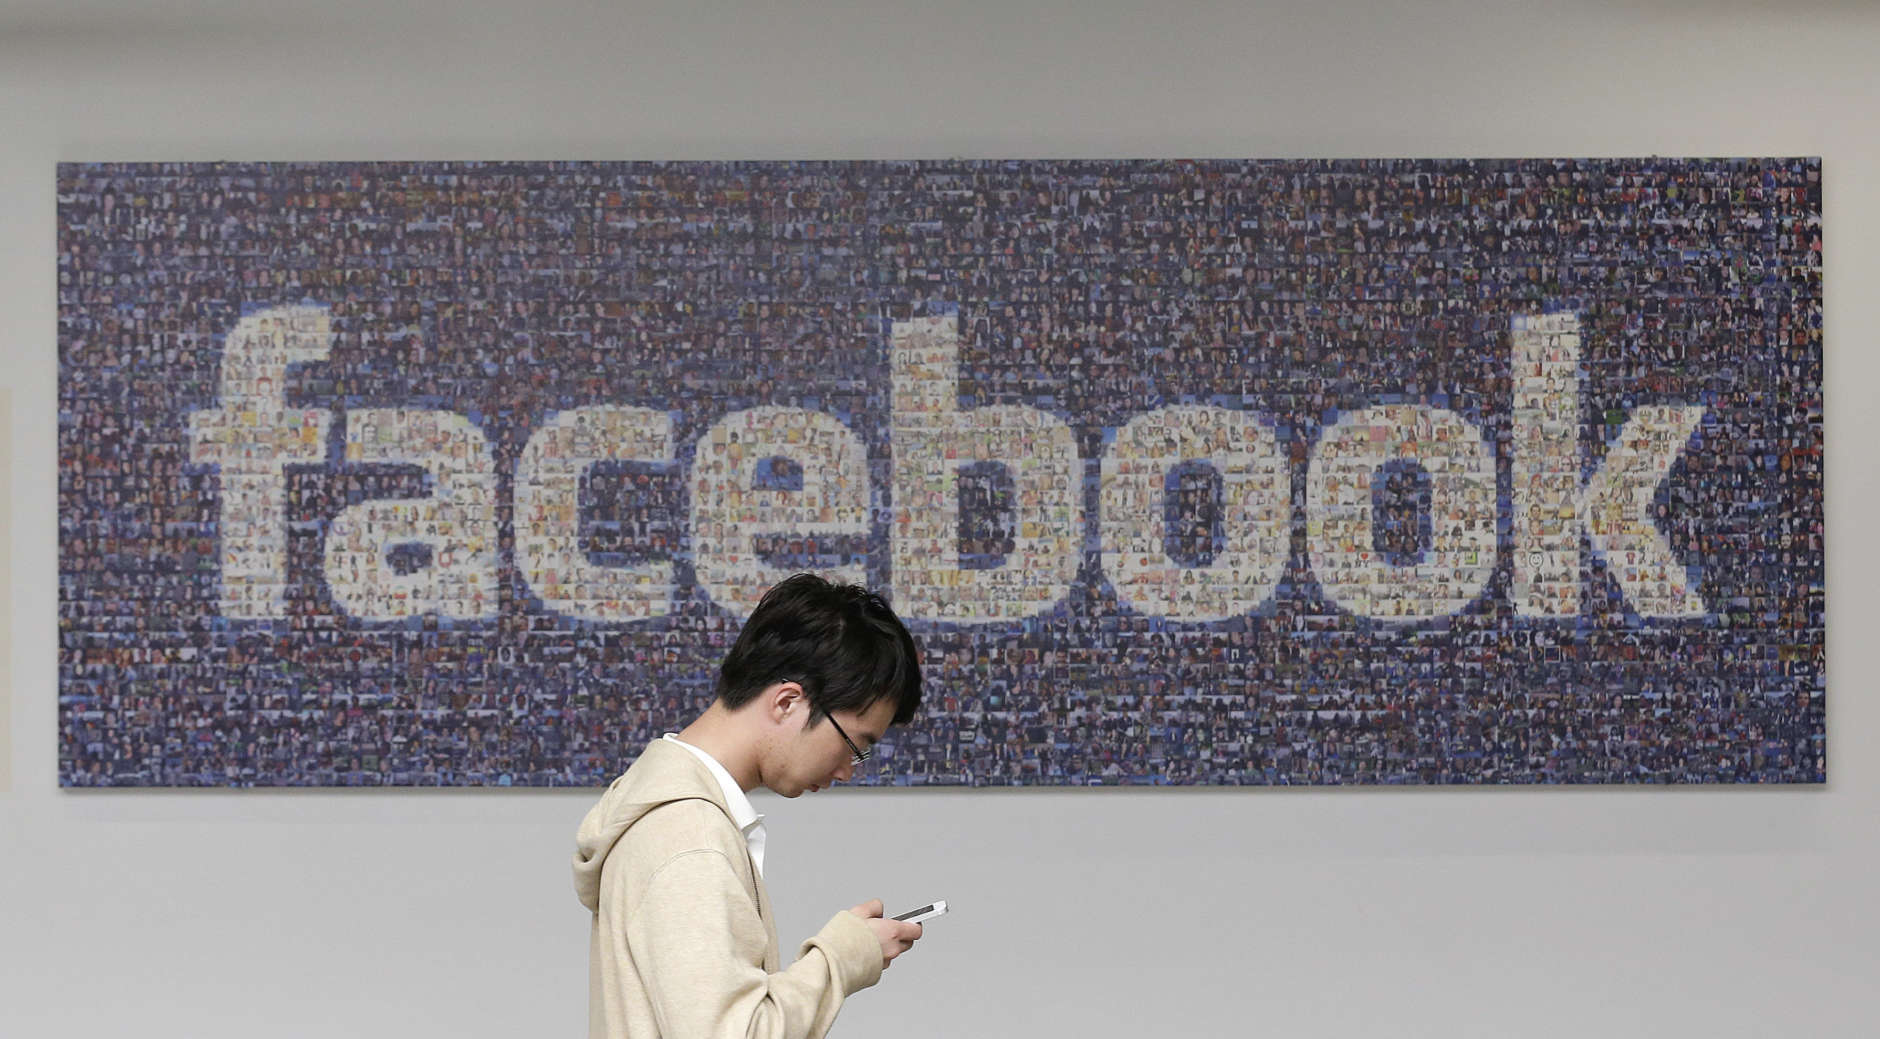 FILE - In this June 11, 2014, file photo, a man walks past a Facebook sign in an office on the Facebook campus in Menlo Park, Calif. Facebook reports financial earnings Wednesday, Jan. 27, 2016. (AP Photo/Jeff Chiu, File)